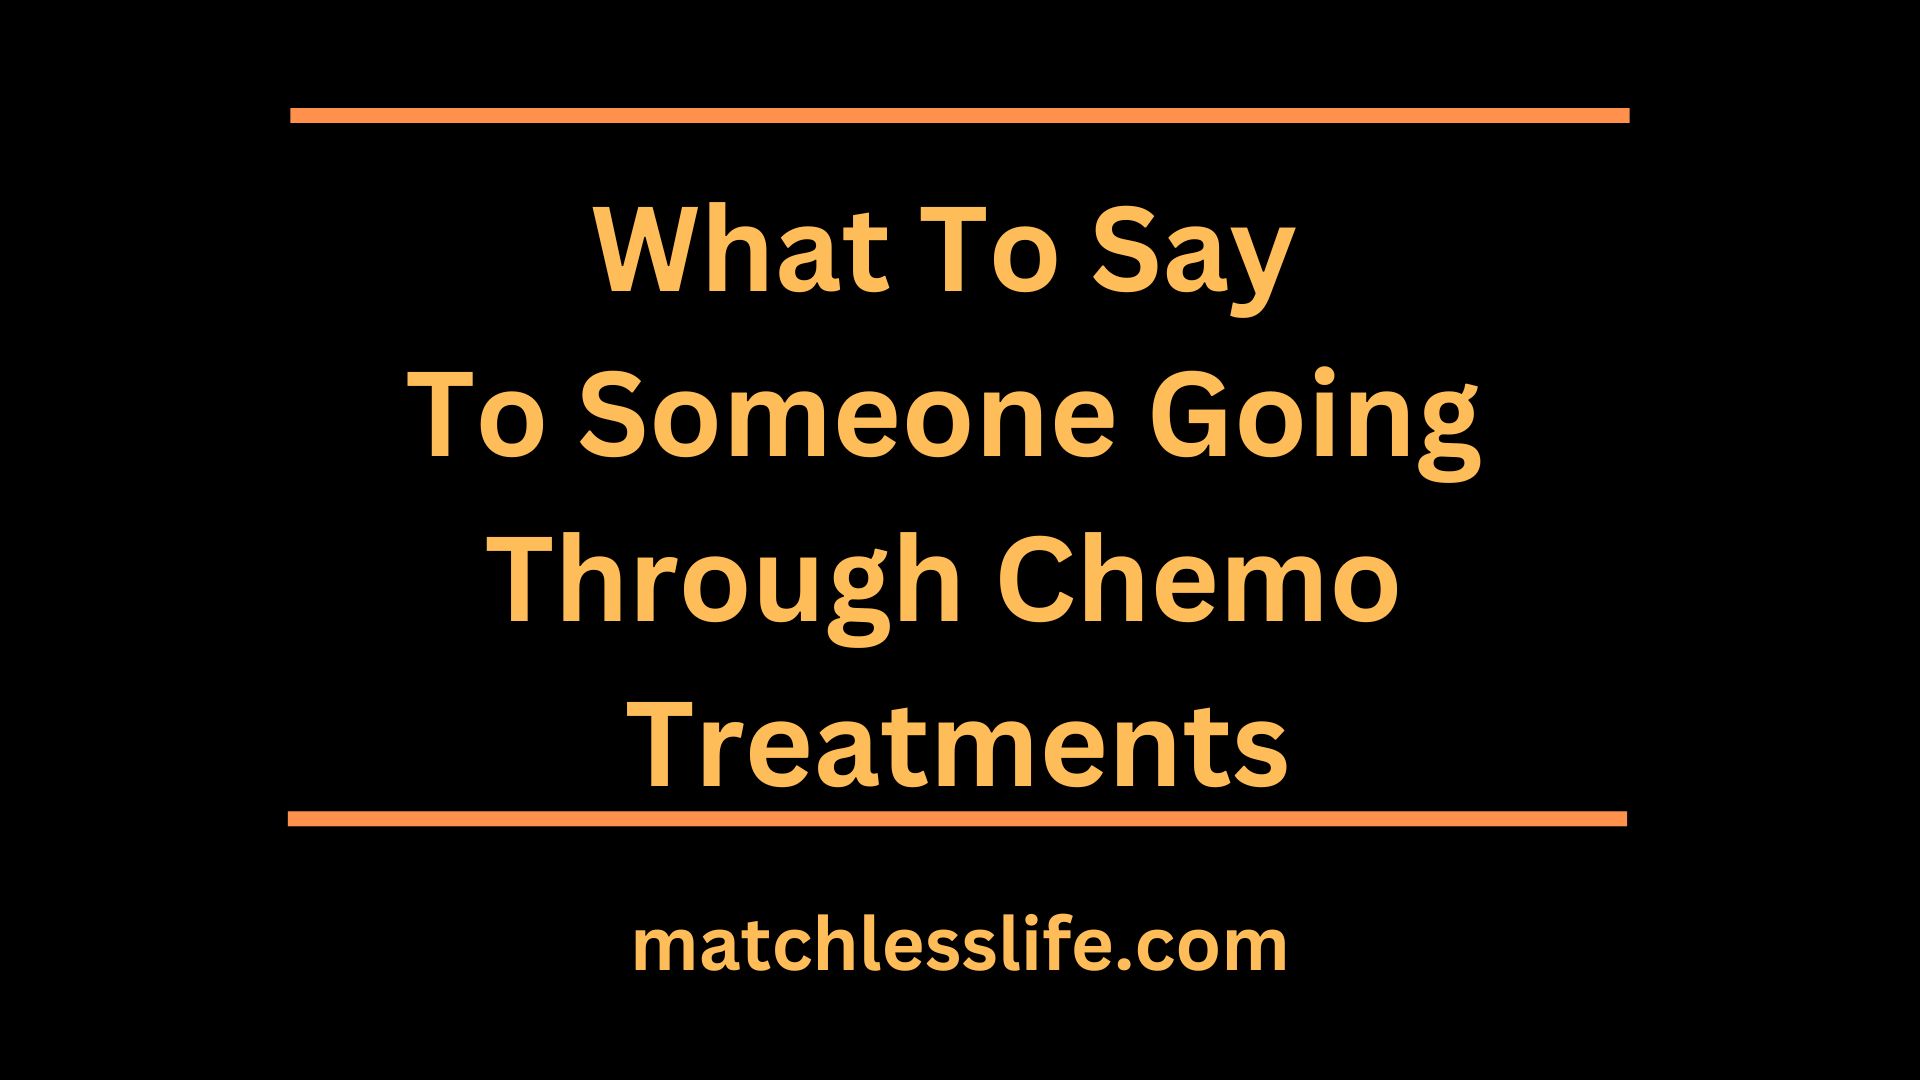 What To Say To Someone Going Through Chemo Treatments